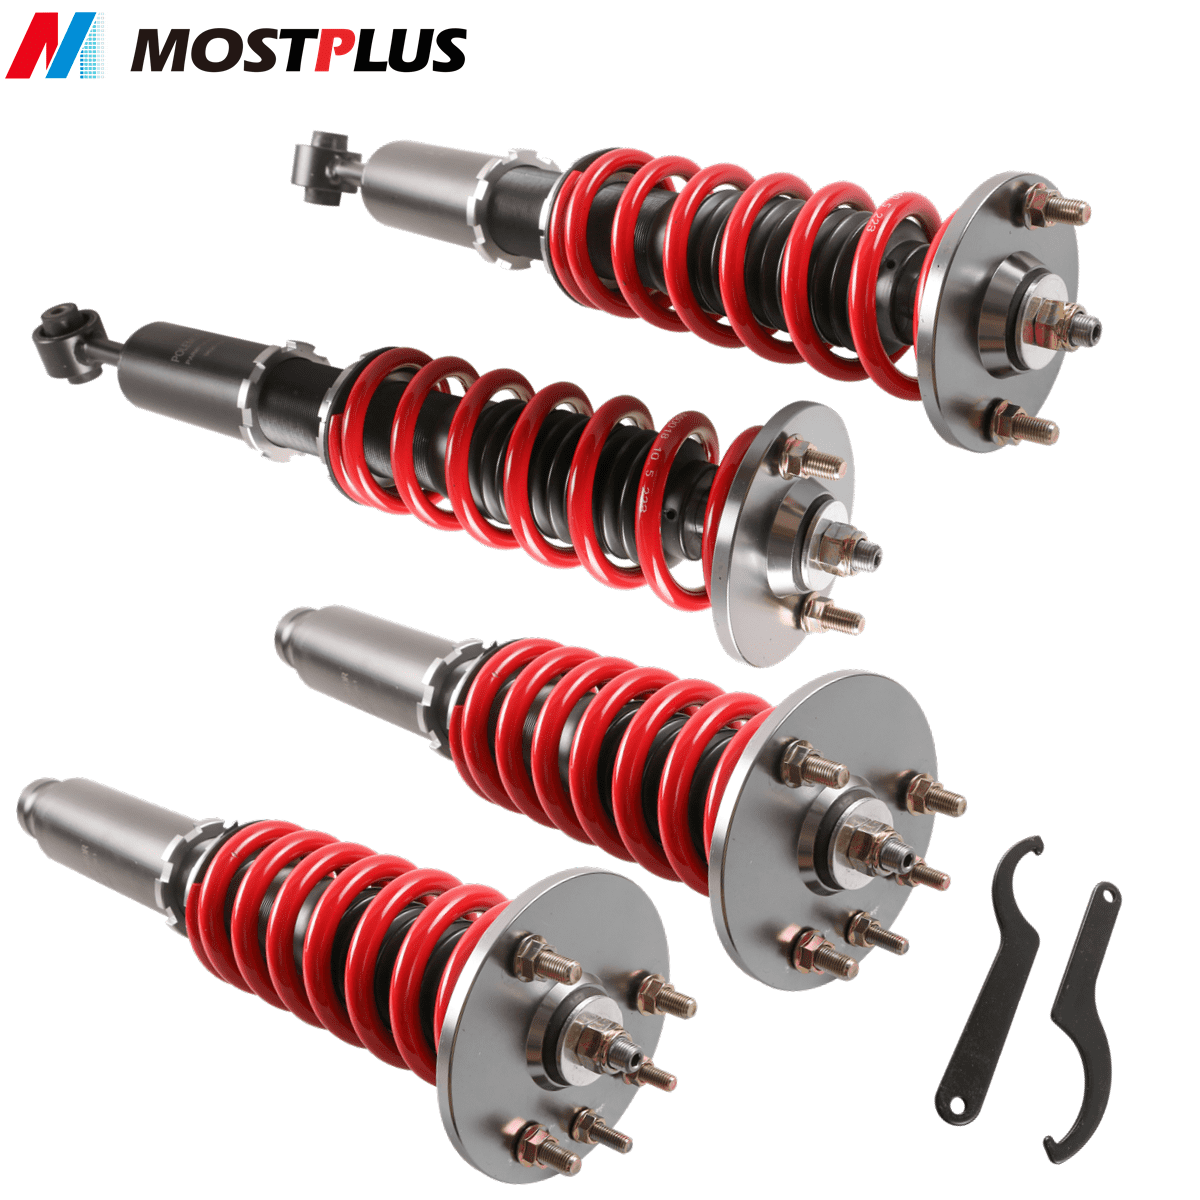 Set of 4 MOSTPLUS Full Coilovers Struts for 2001-2003 Acura CL/1999-2003 Acura TL/1998-2002 Honda Accord Adjustable Height Shock Absorber Assembly 